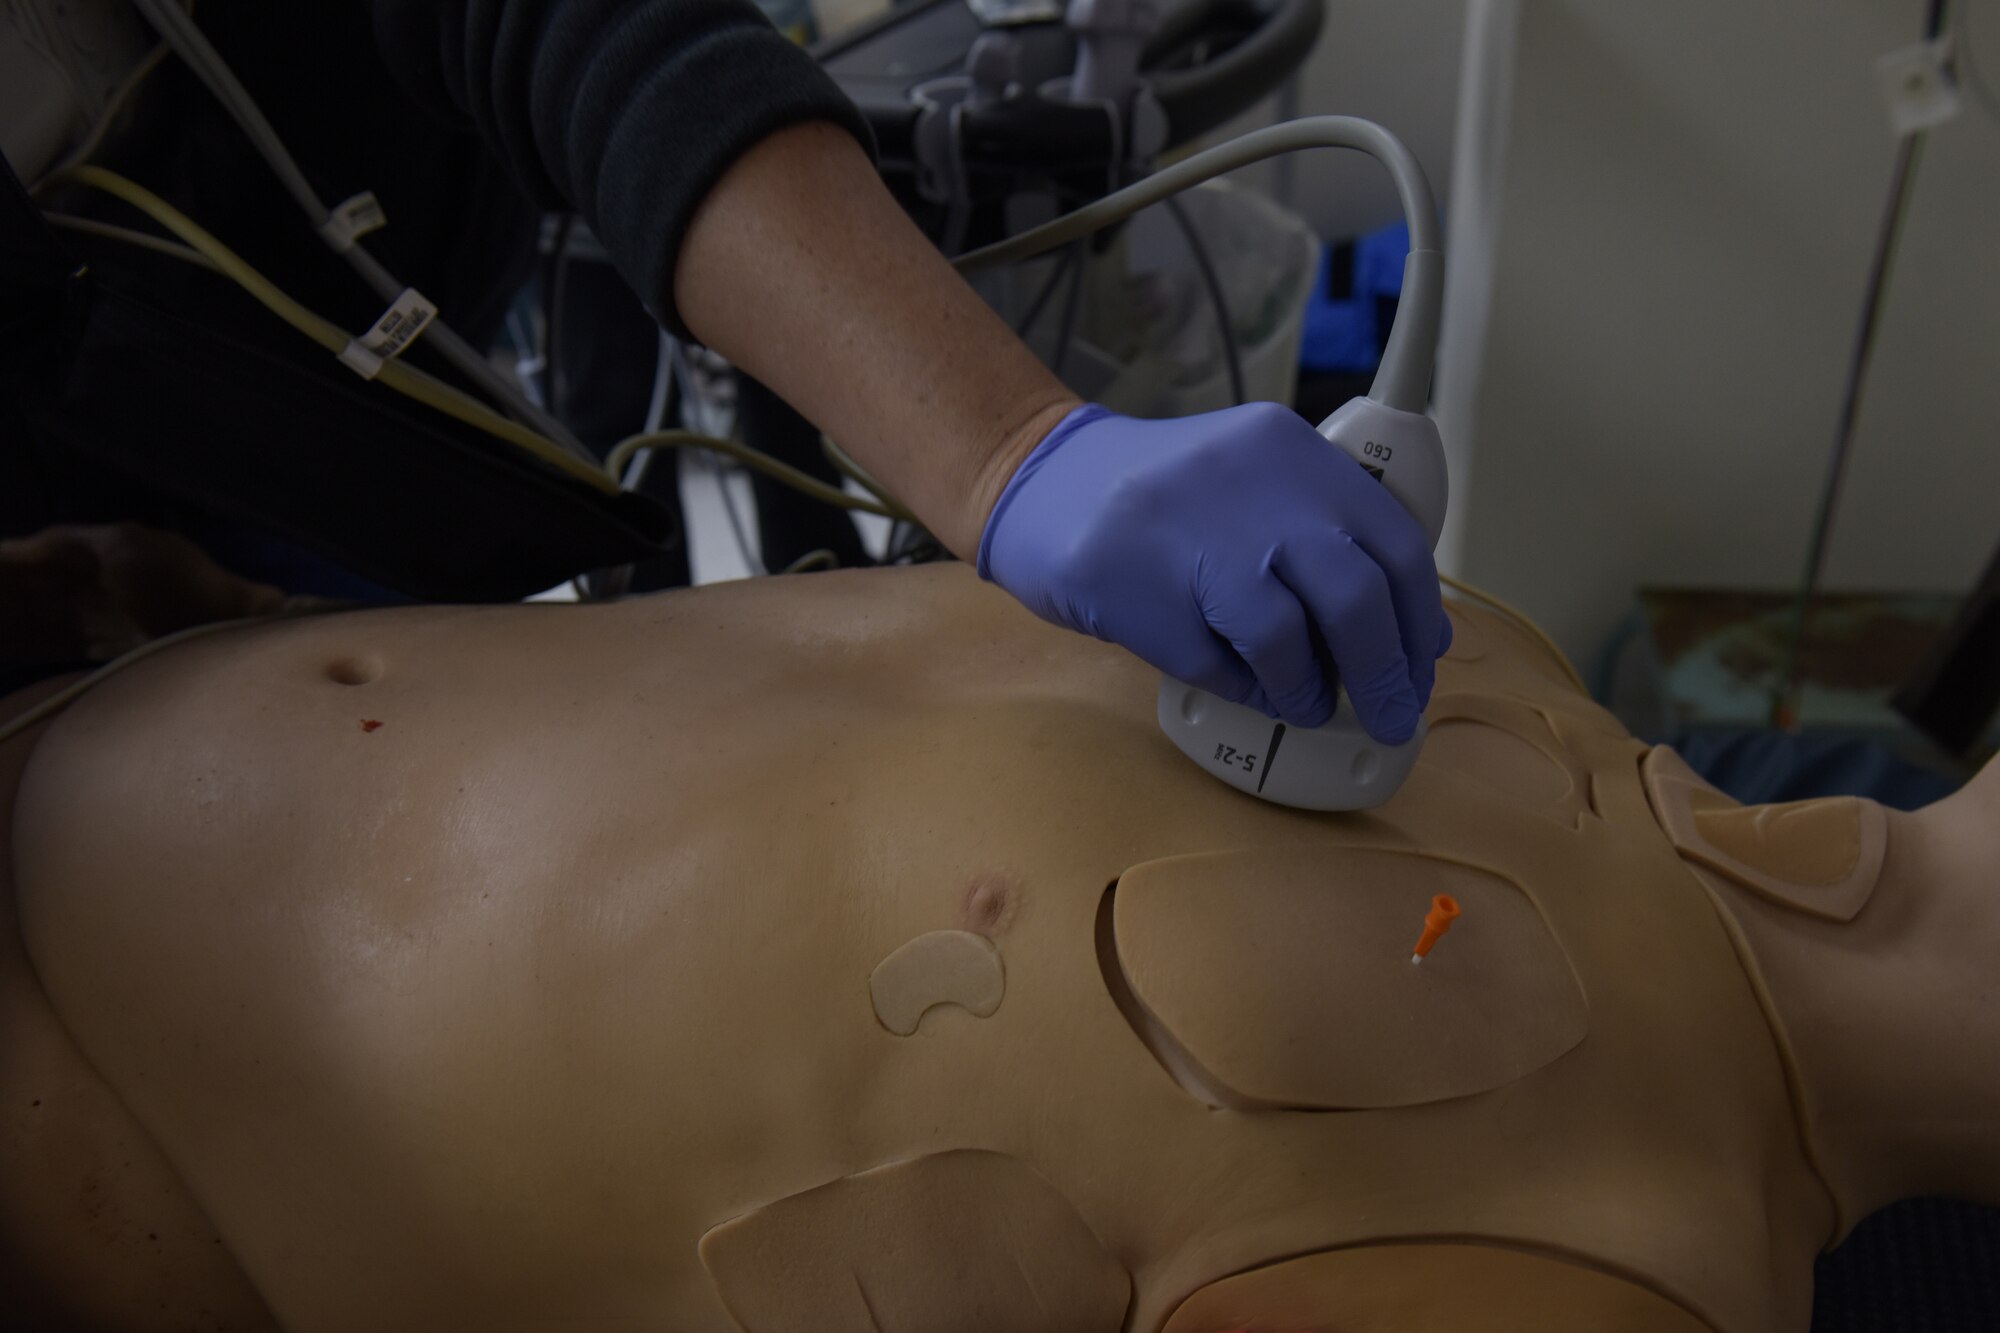 A woman uses an ultrasound machine on a mannequin